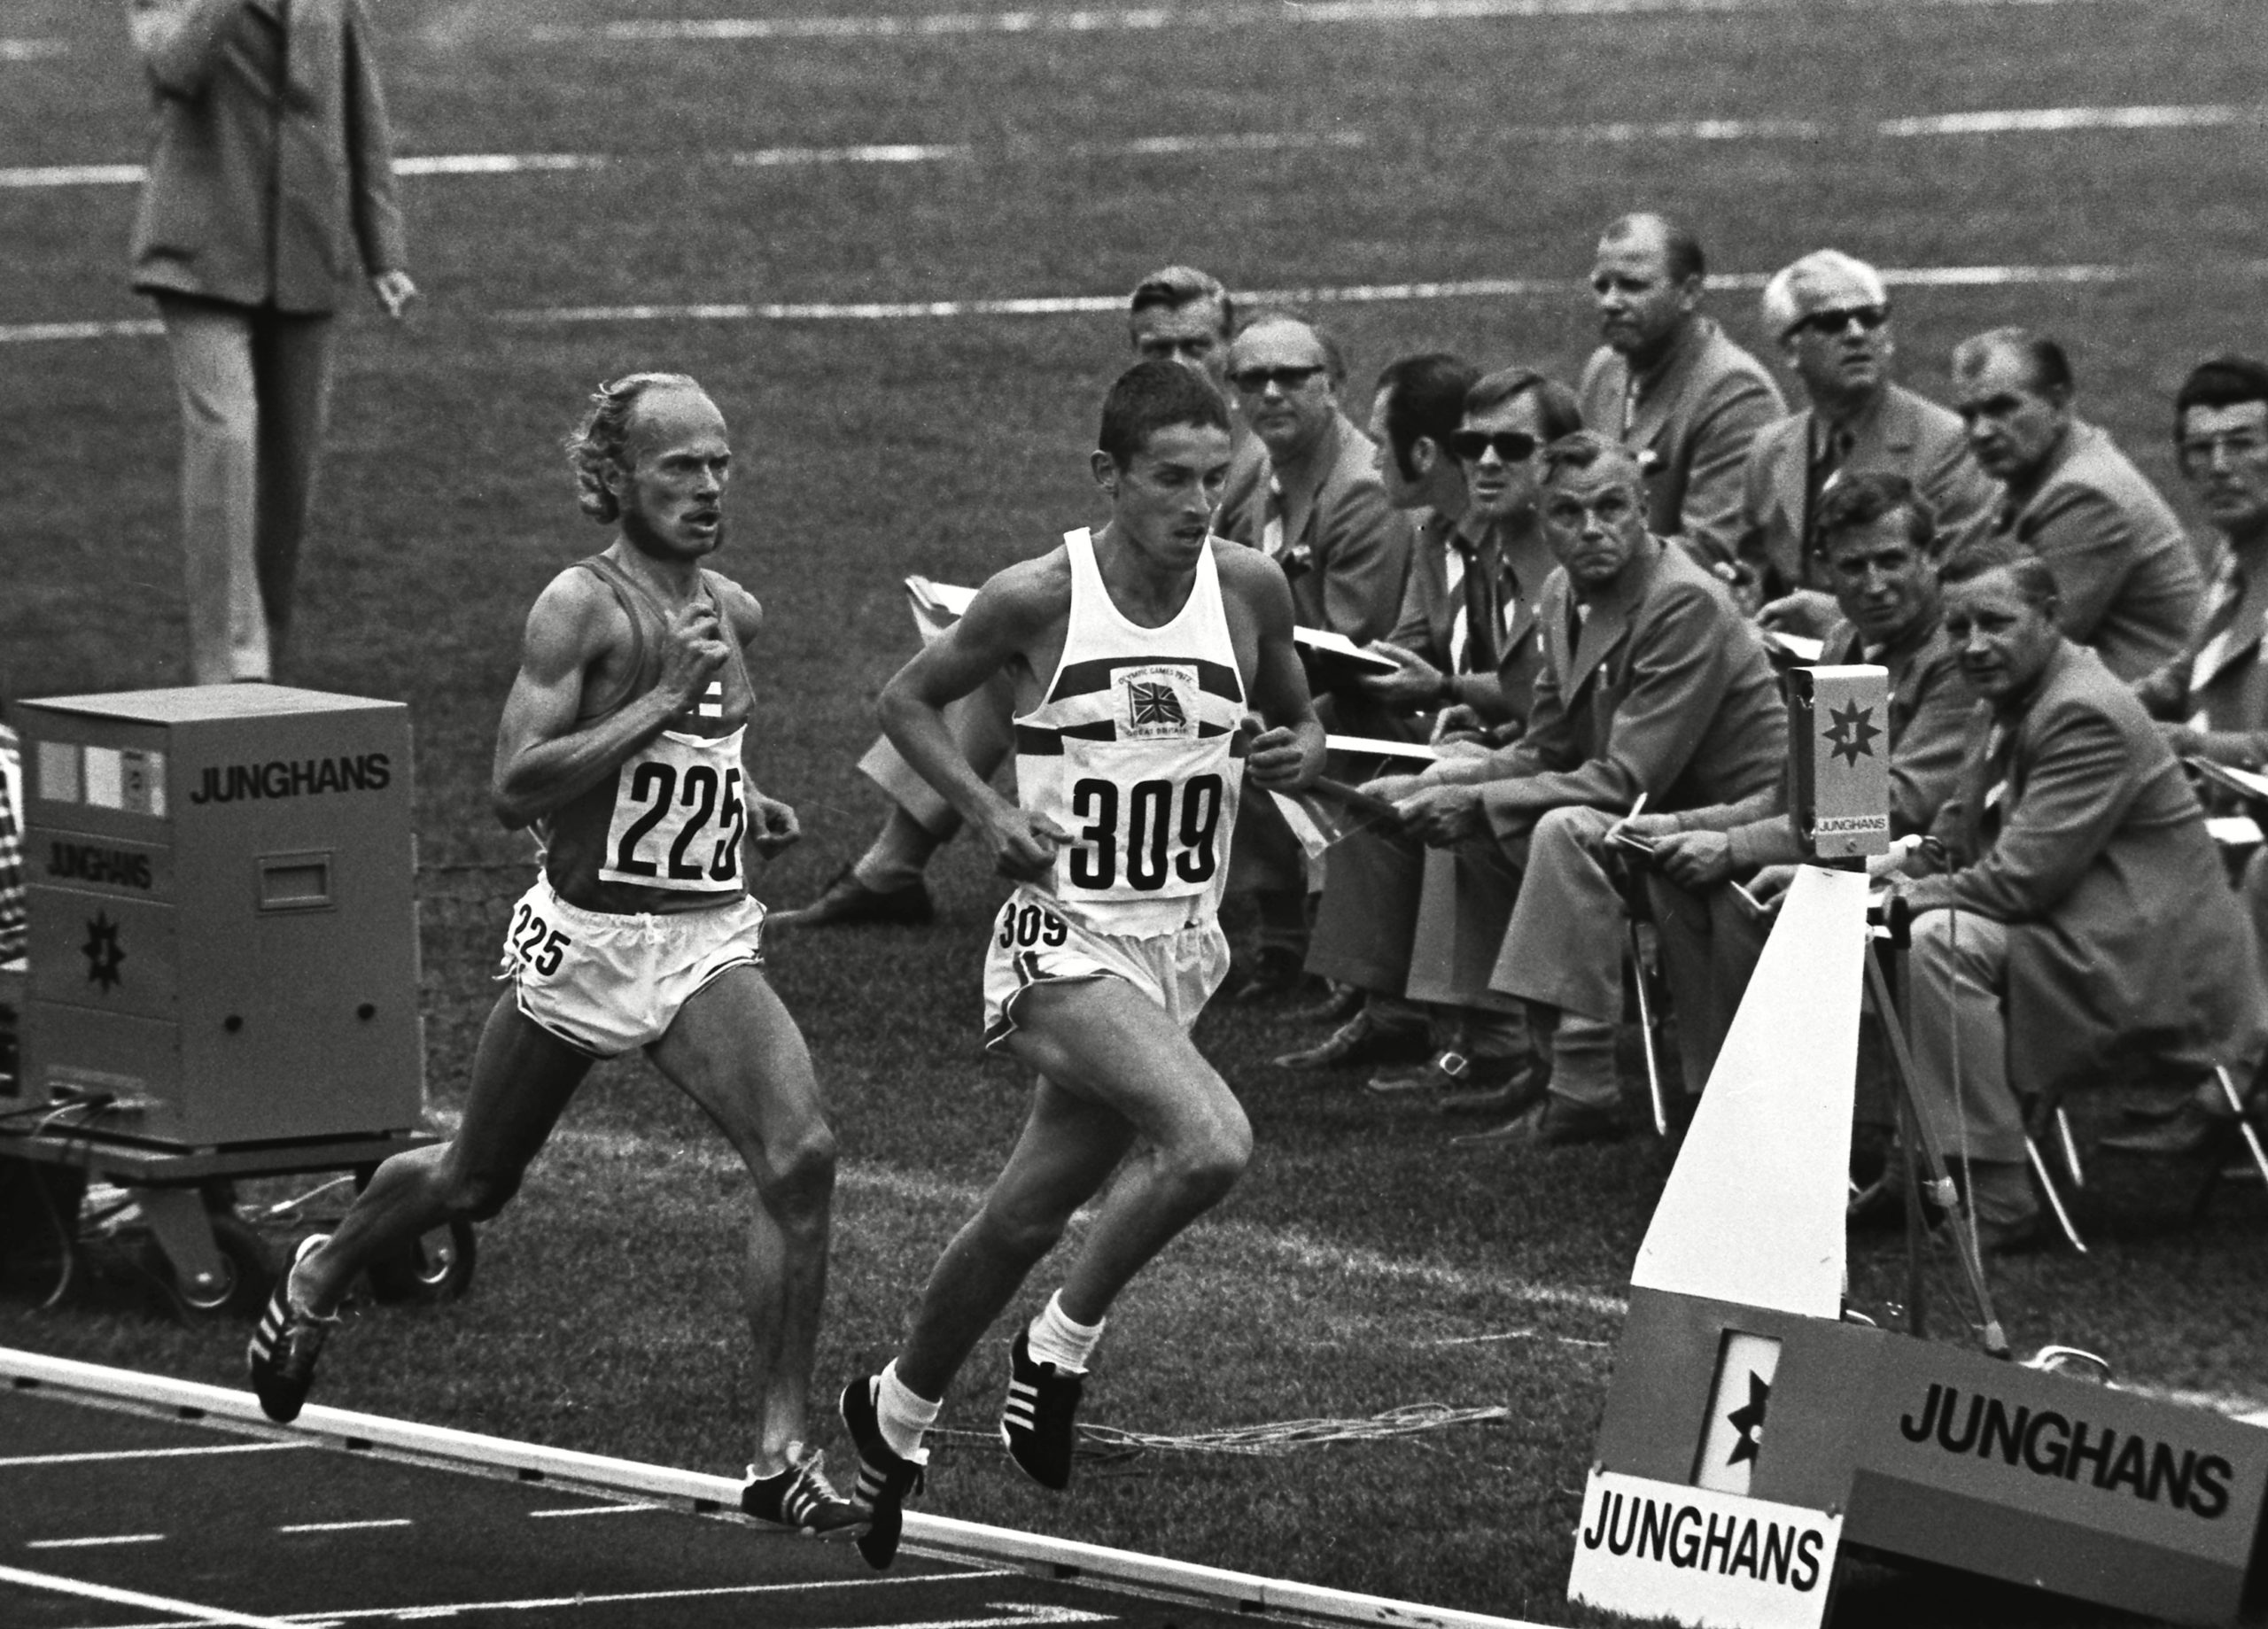 Ian Stewart in action at the 1972 Olympics.